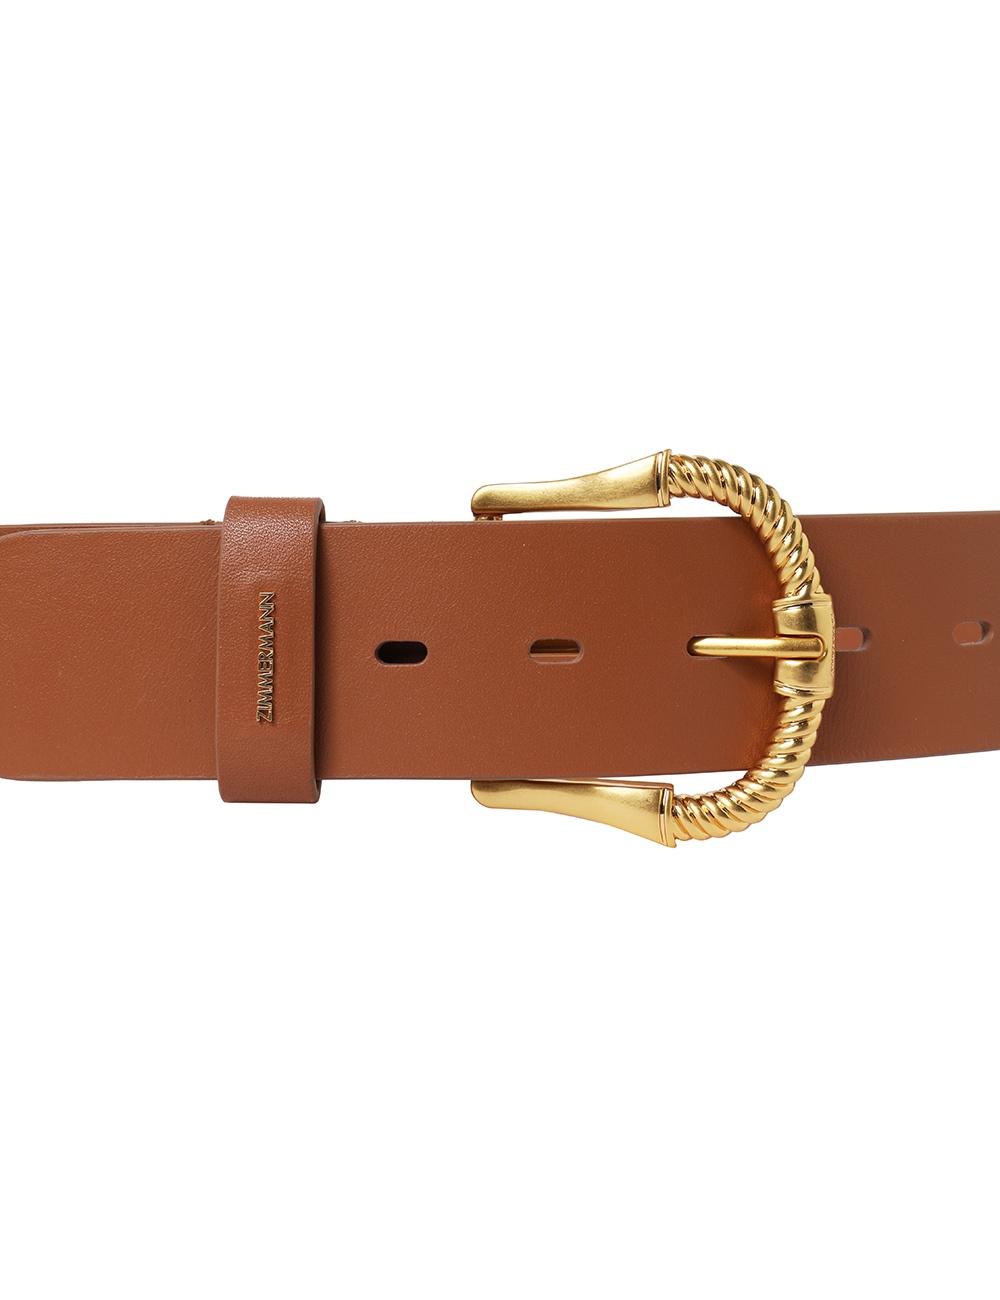 TWISTED BUCKLE LEATHER BELT 40 - 3